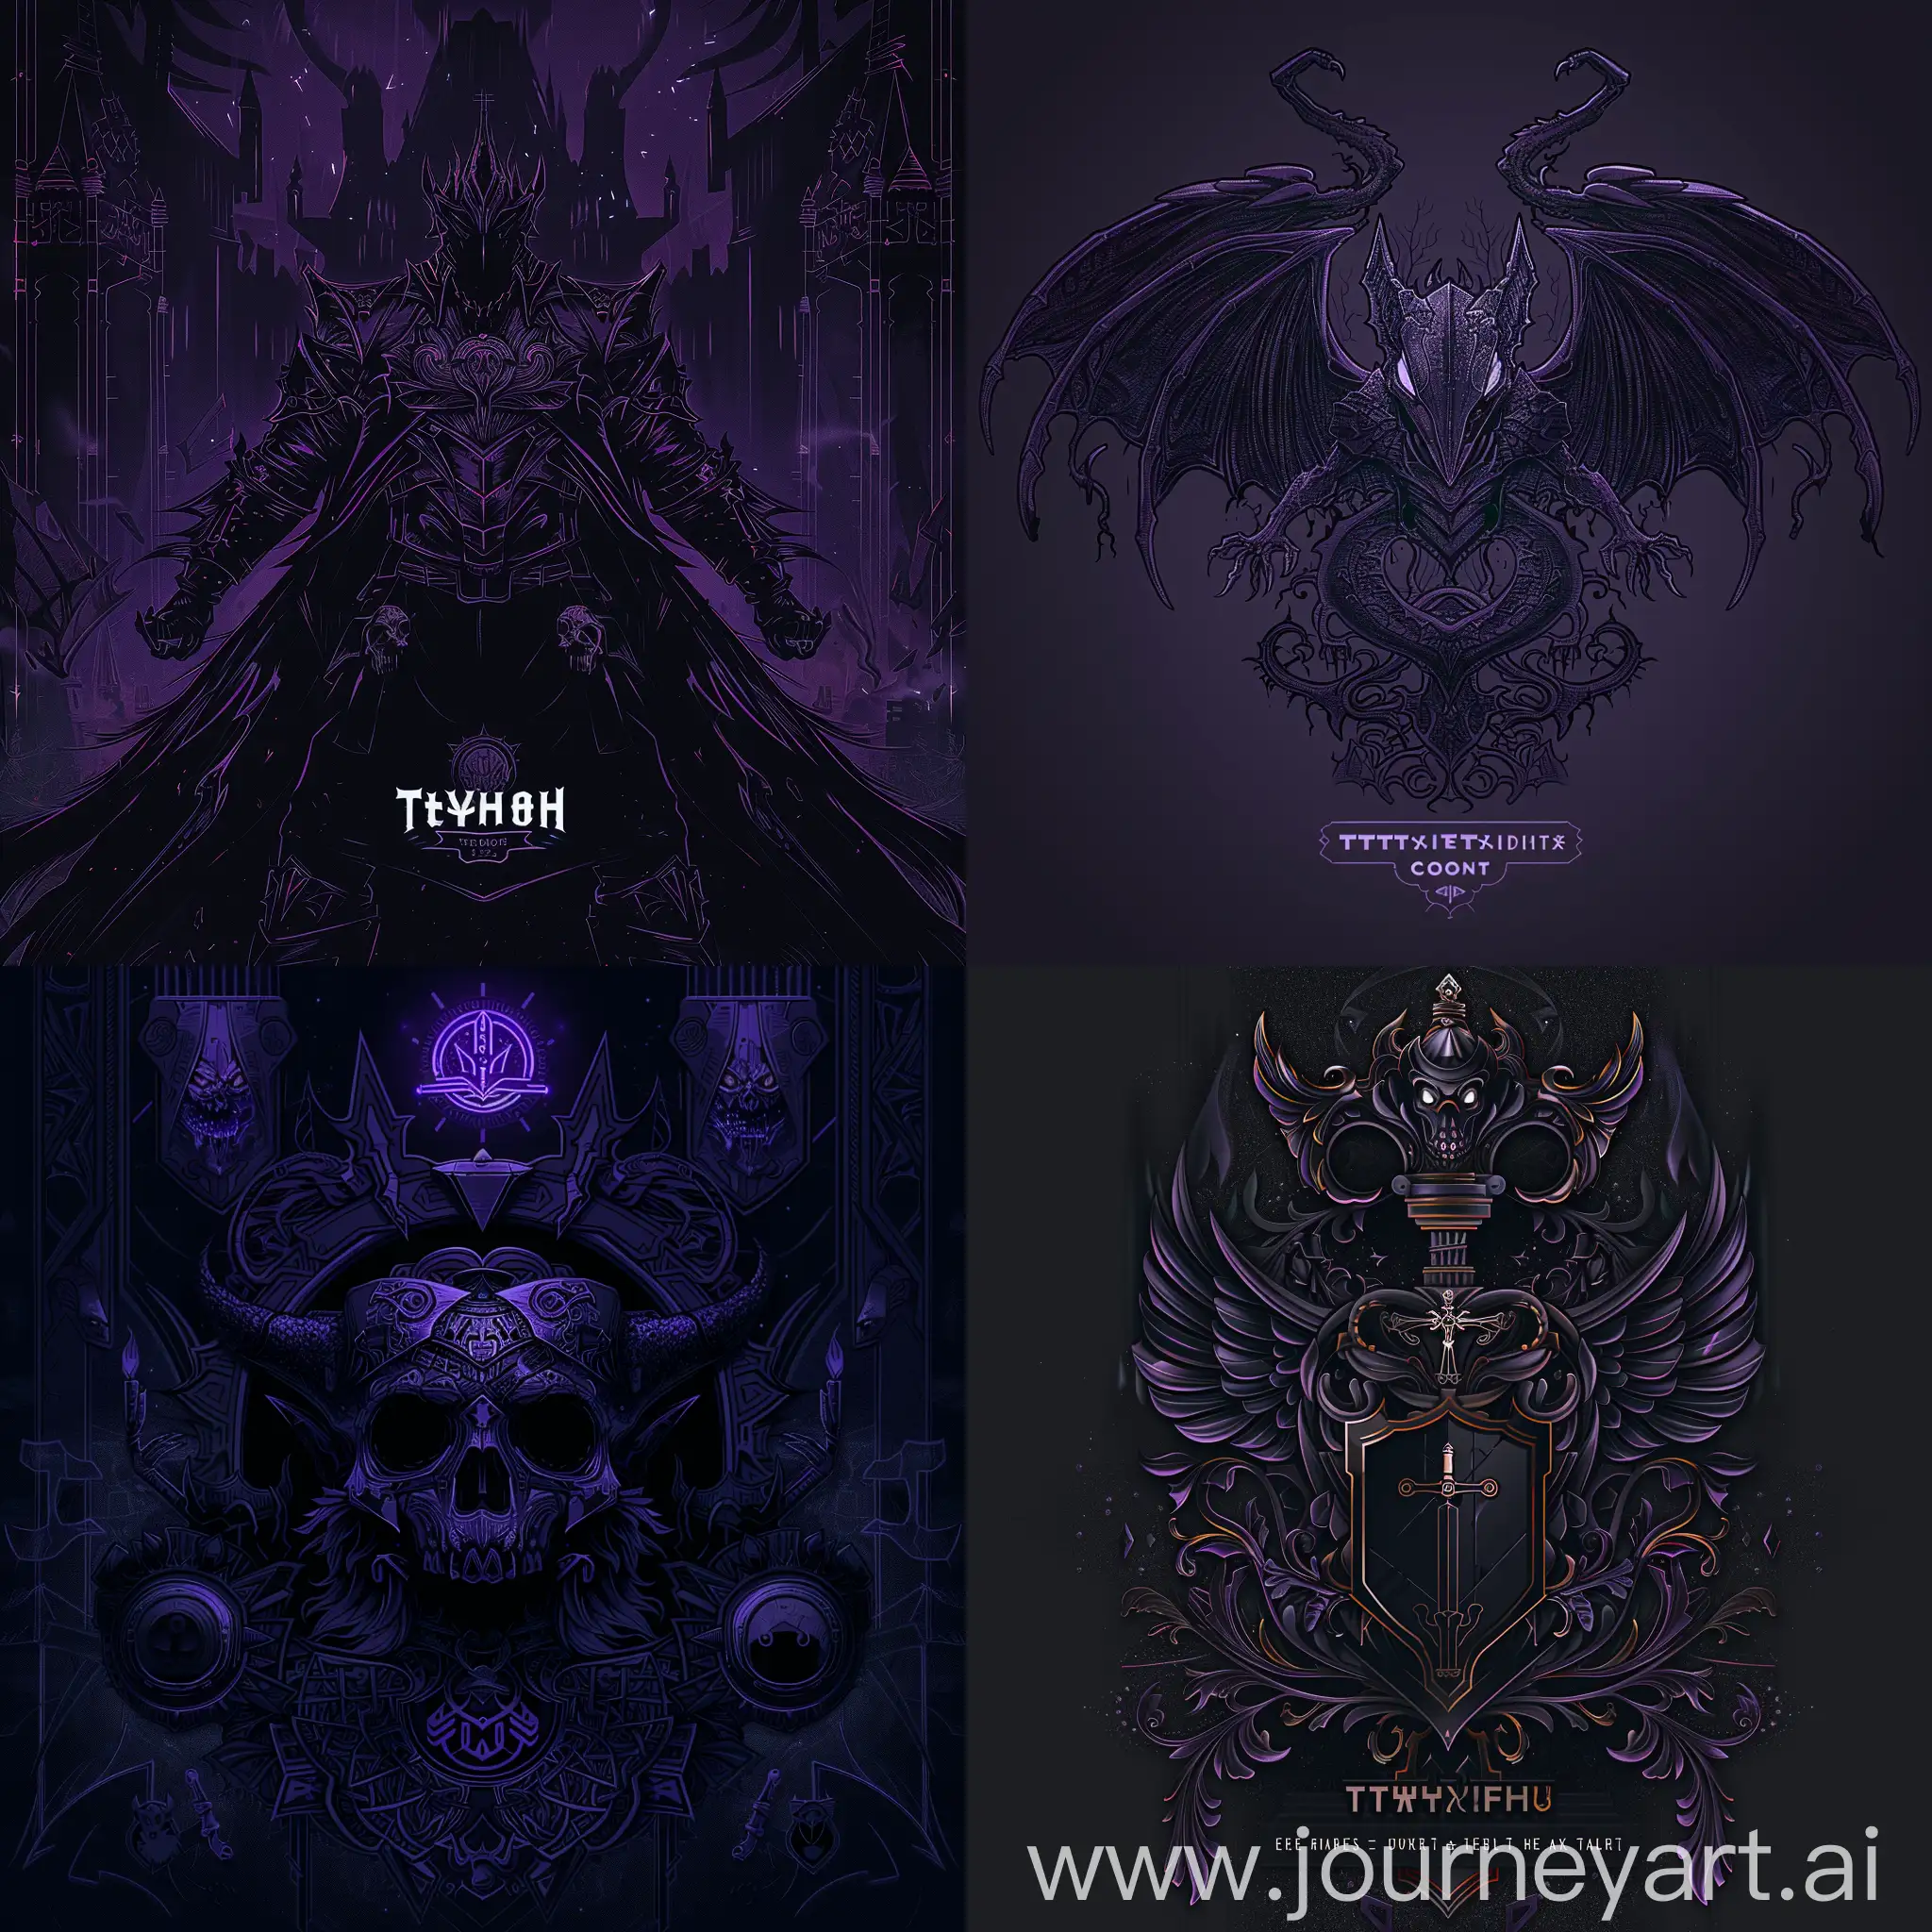 Create a design concept for a Twitch channel inspired by dark fantasy and noir style. The design should evoke a sense of mystery, tension and Gothic horror. Please provide a detailed description of the color palette, typography, and any iconic elements or symbols that will be used to represent the aesthetics of the channel